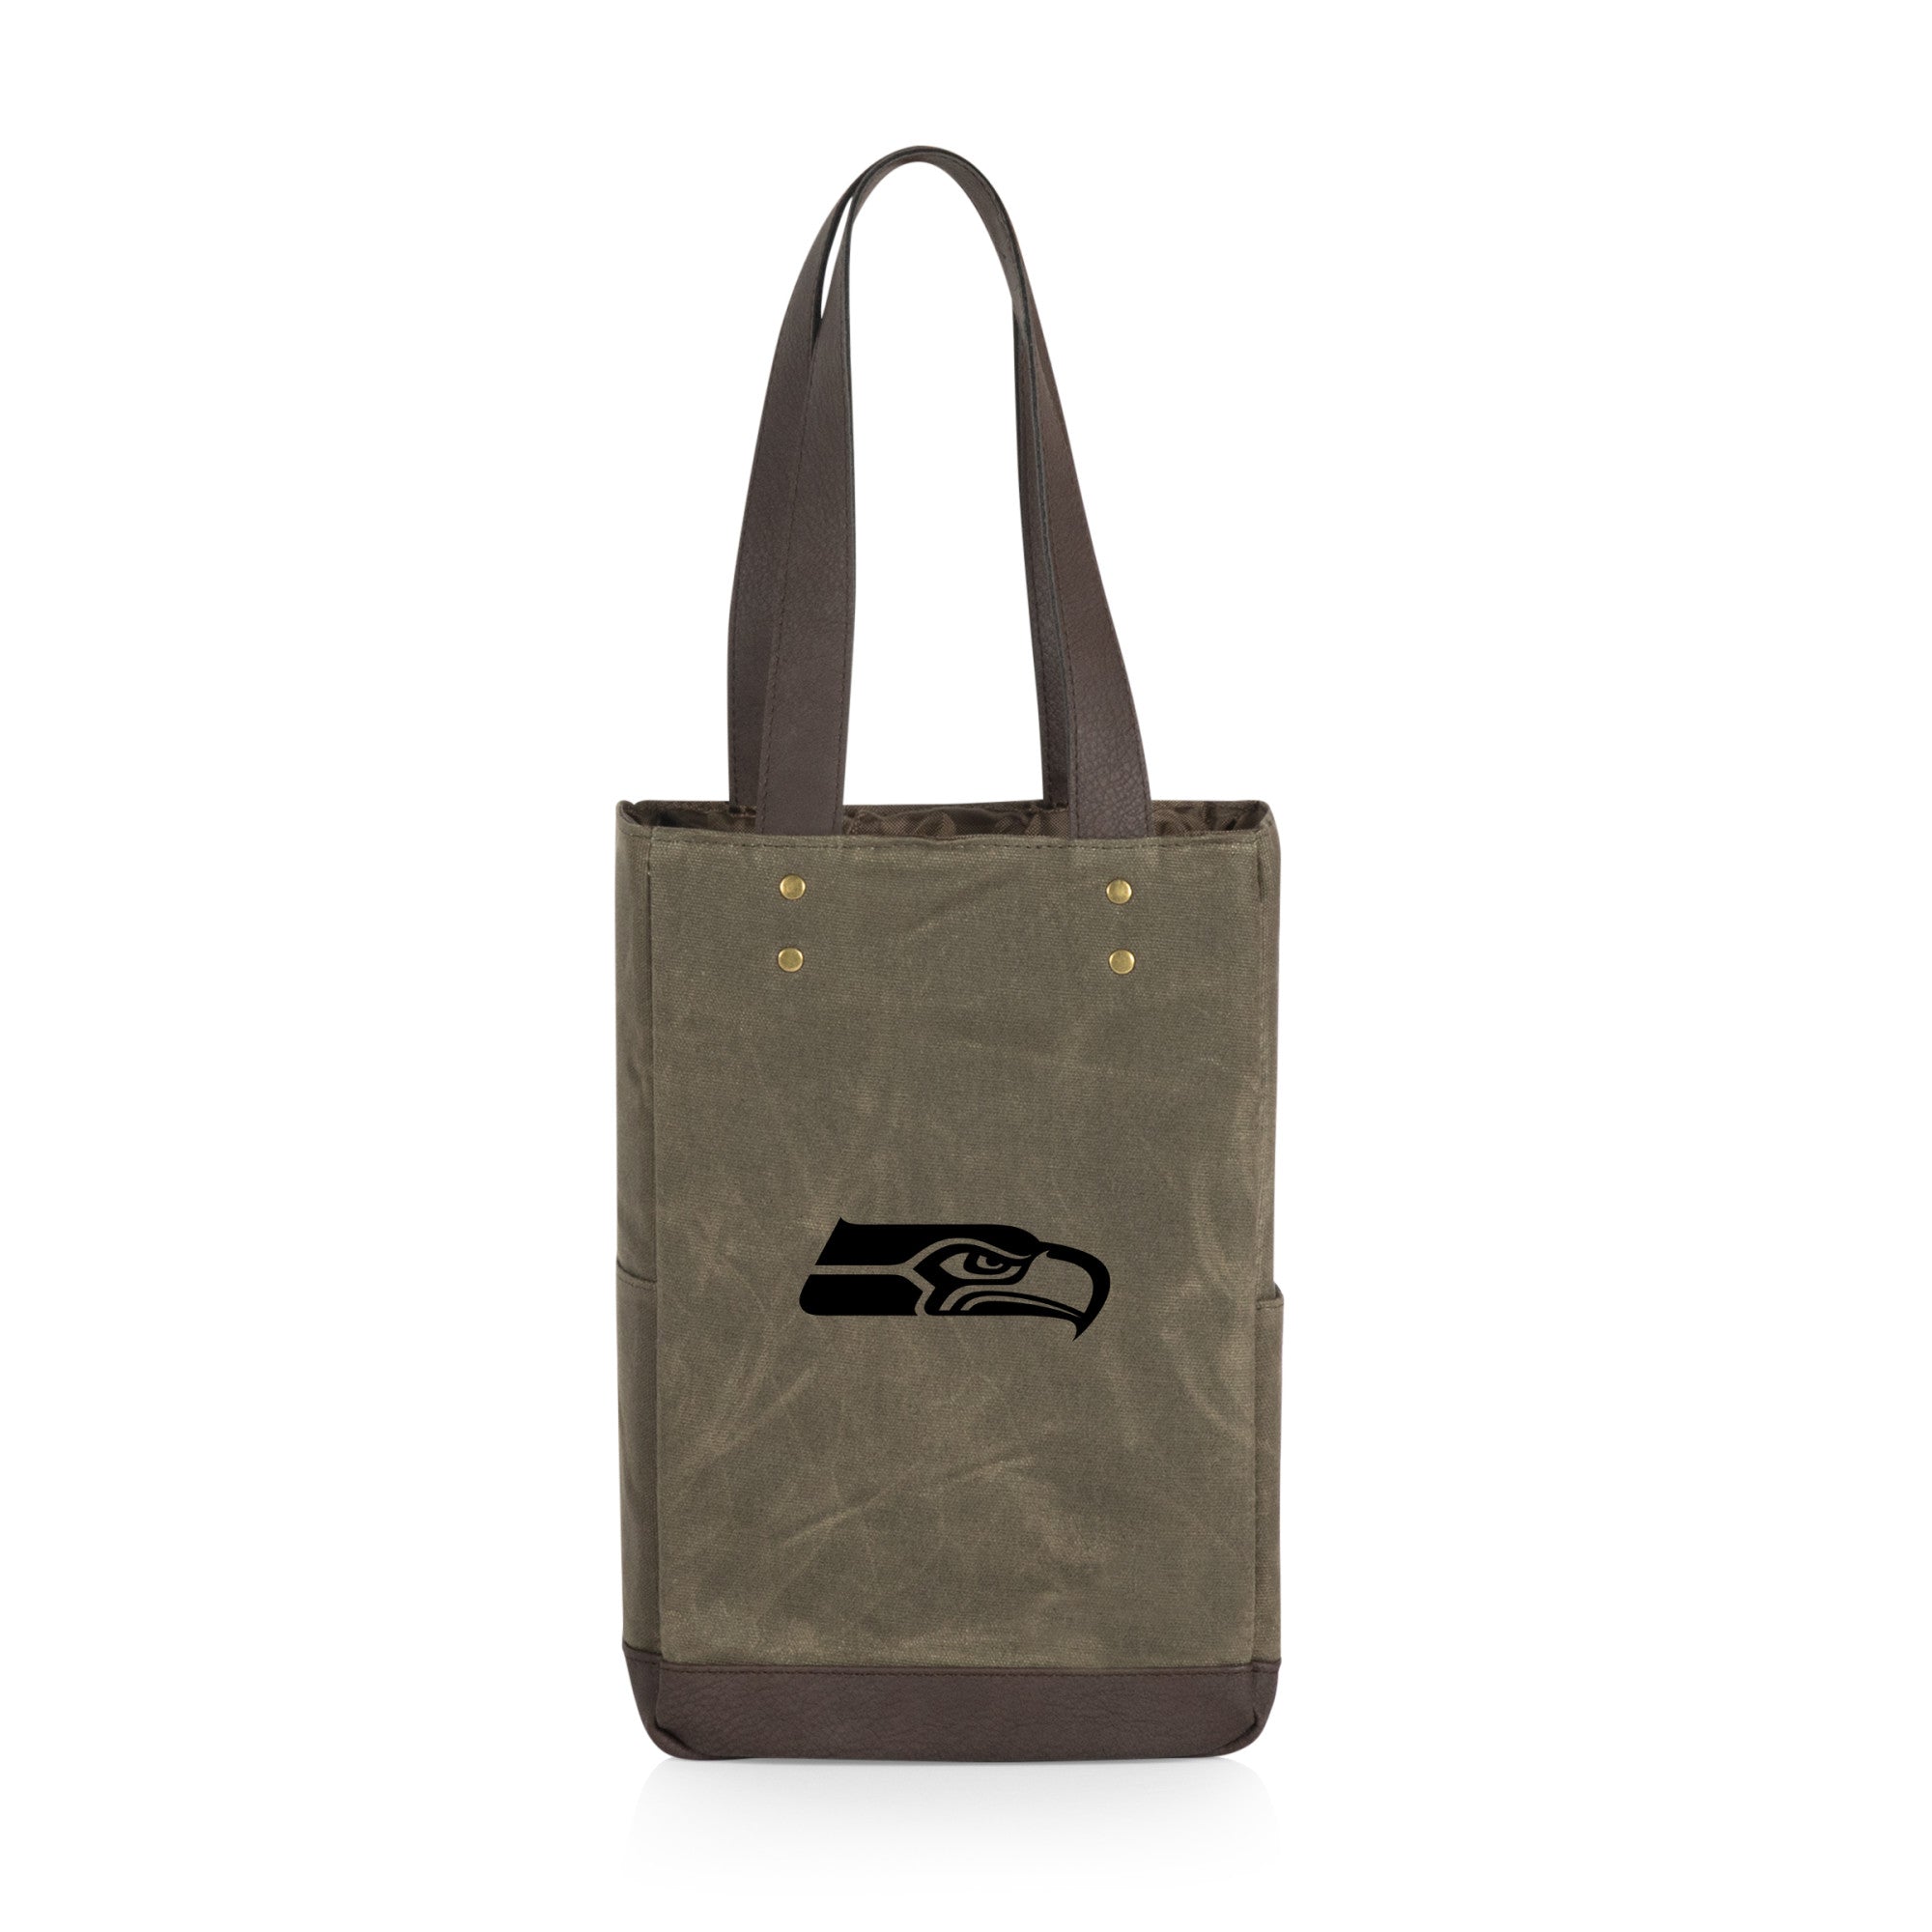 Seattle Seahawks - 2 Bottle Insulated Wine Cooler Bag